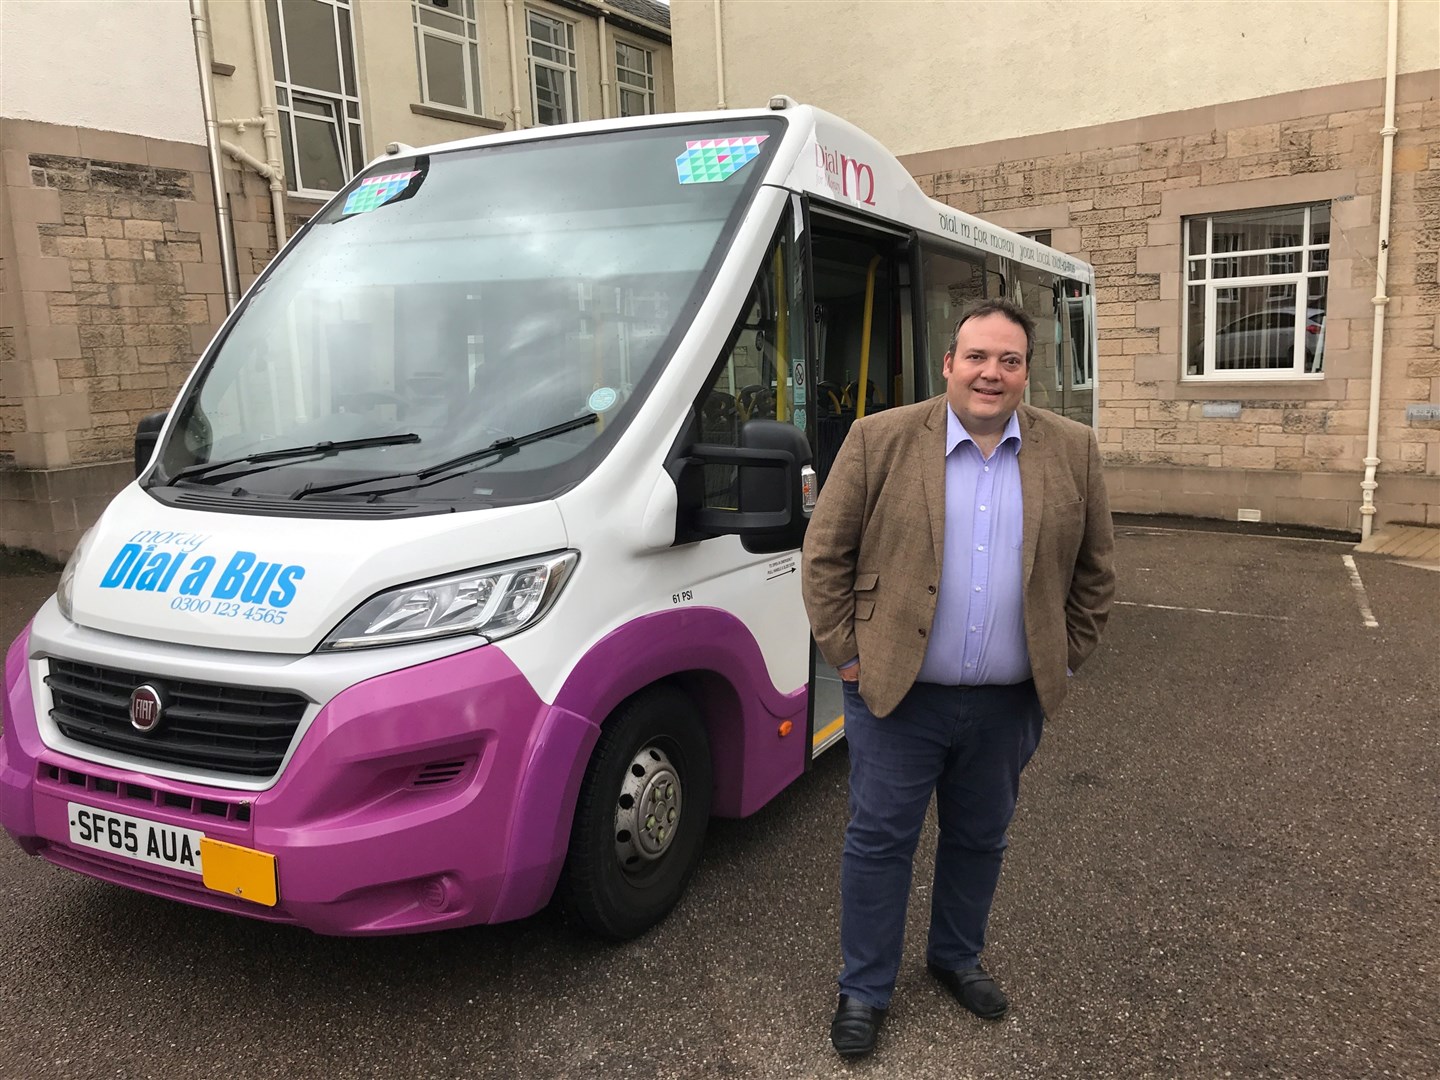 Jamie Halcro Johnston in front of a Dial-a-Bus at Moray Council headquarters in Elgin.